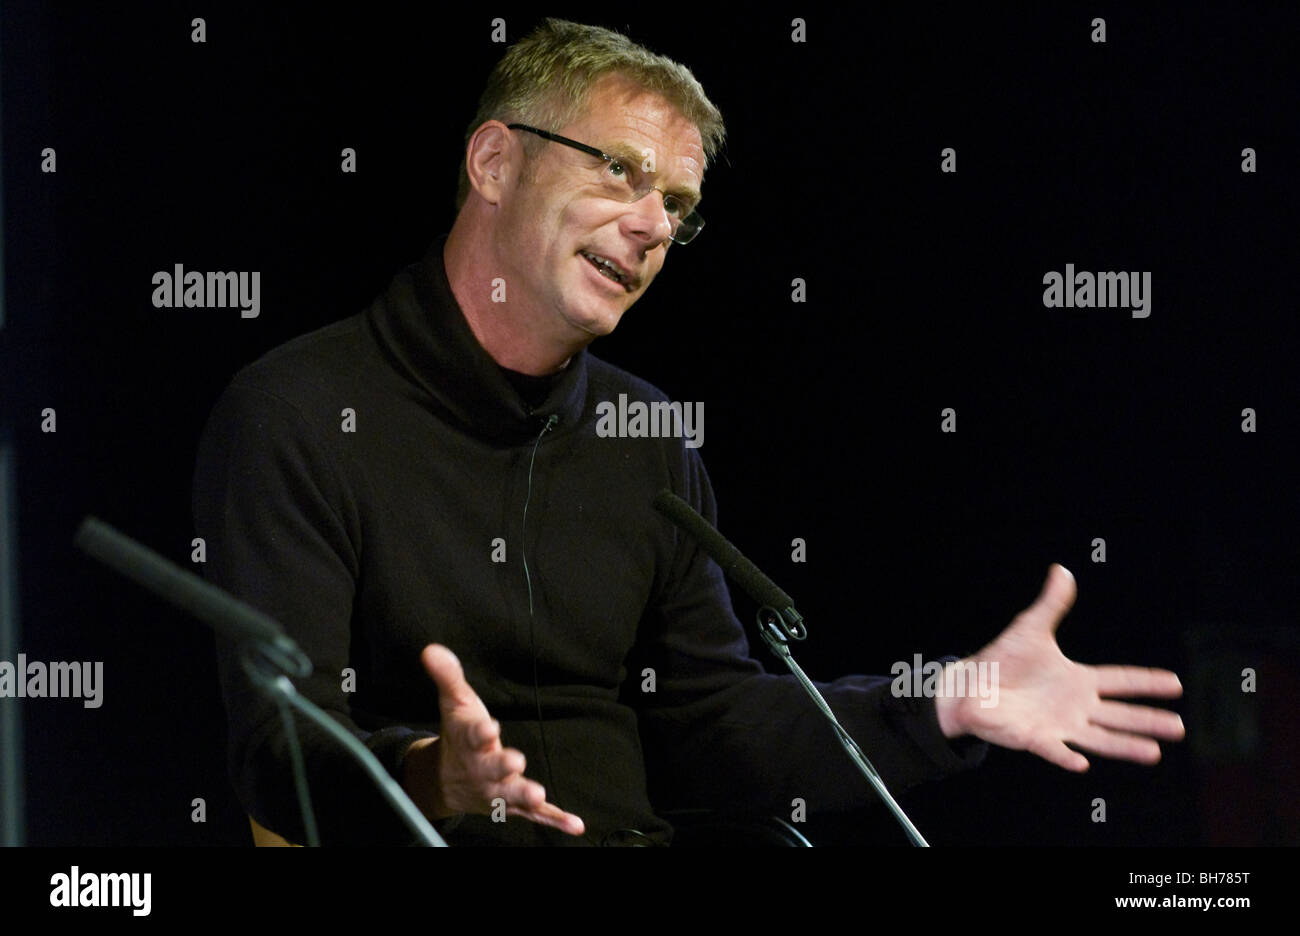 Film and theatre director Stephen Daldry pictured discussing his work at Hay Festival 2009. Stock Photo